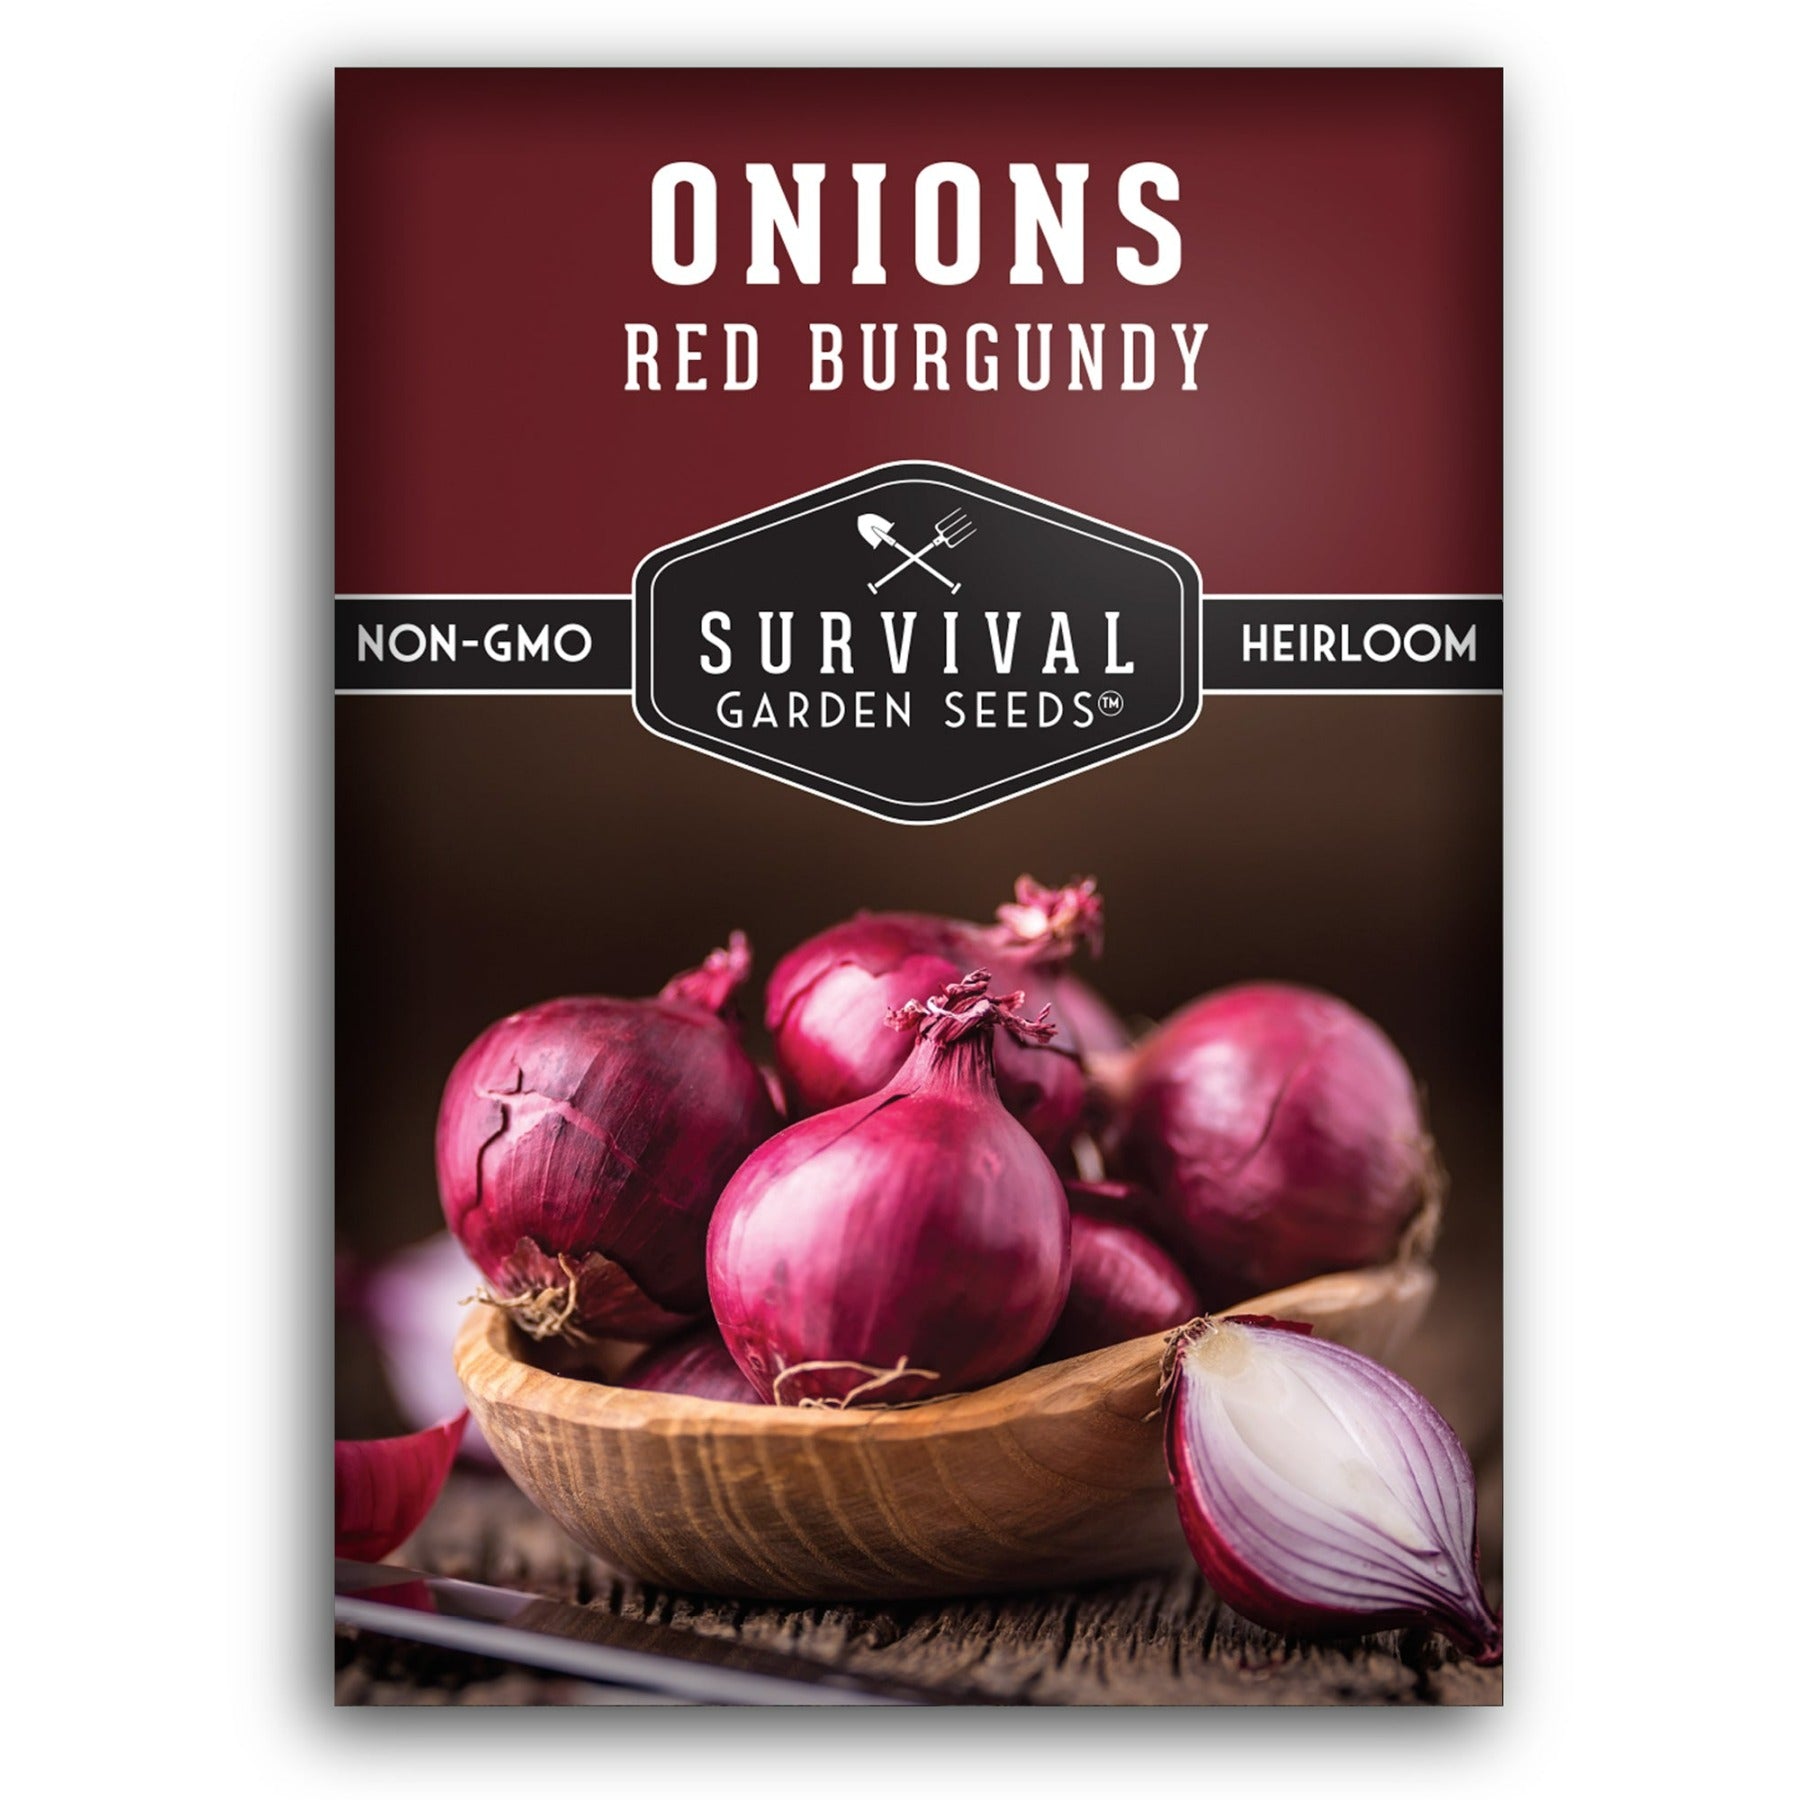 Red Burgundy Onion seeds for planting